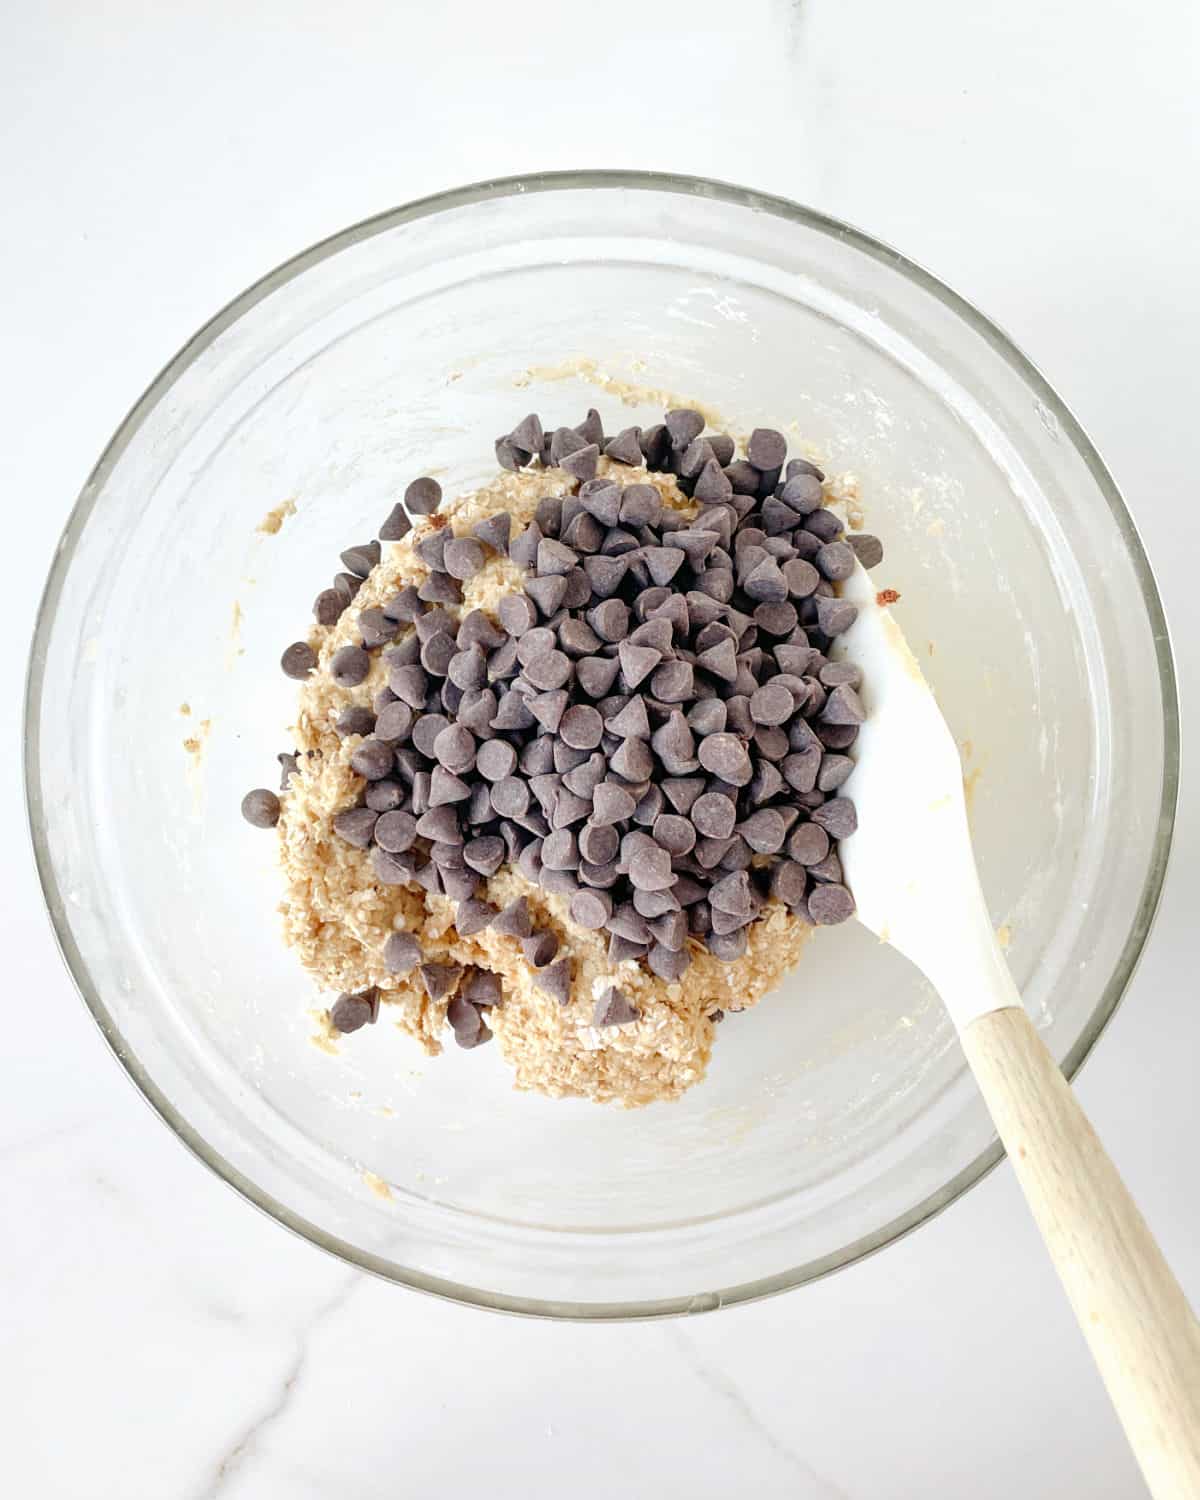 Chocolate chips added to cookie dough in a glass bowl with a white silicon spatula. White marble surface.